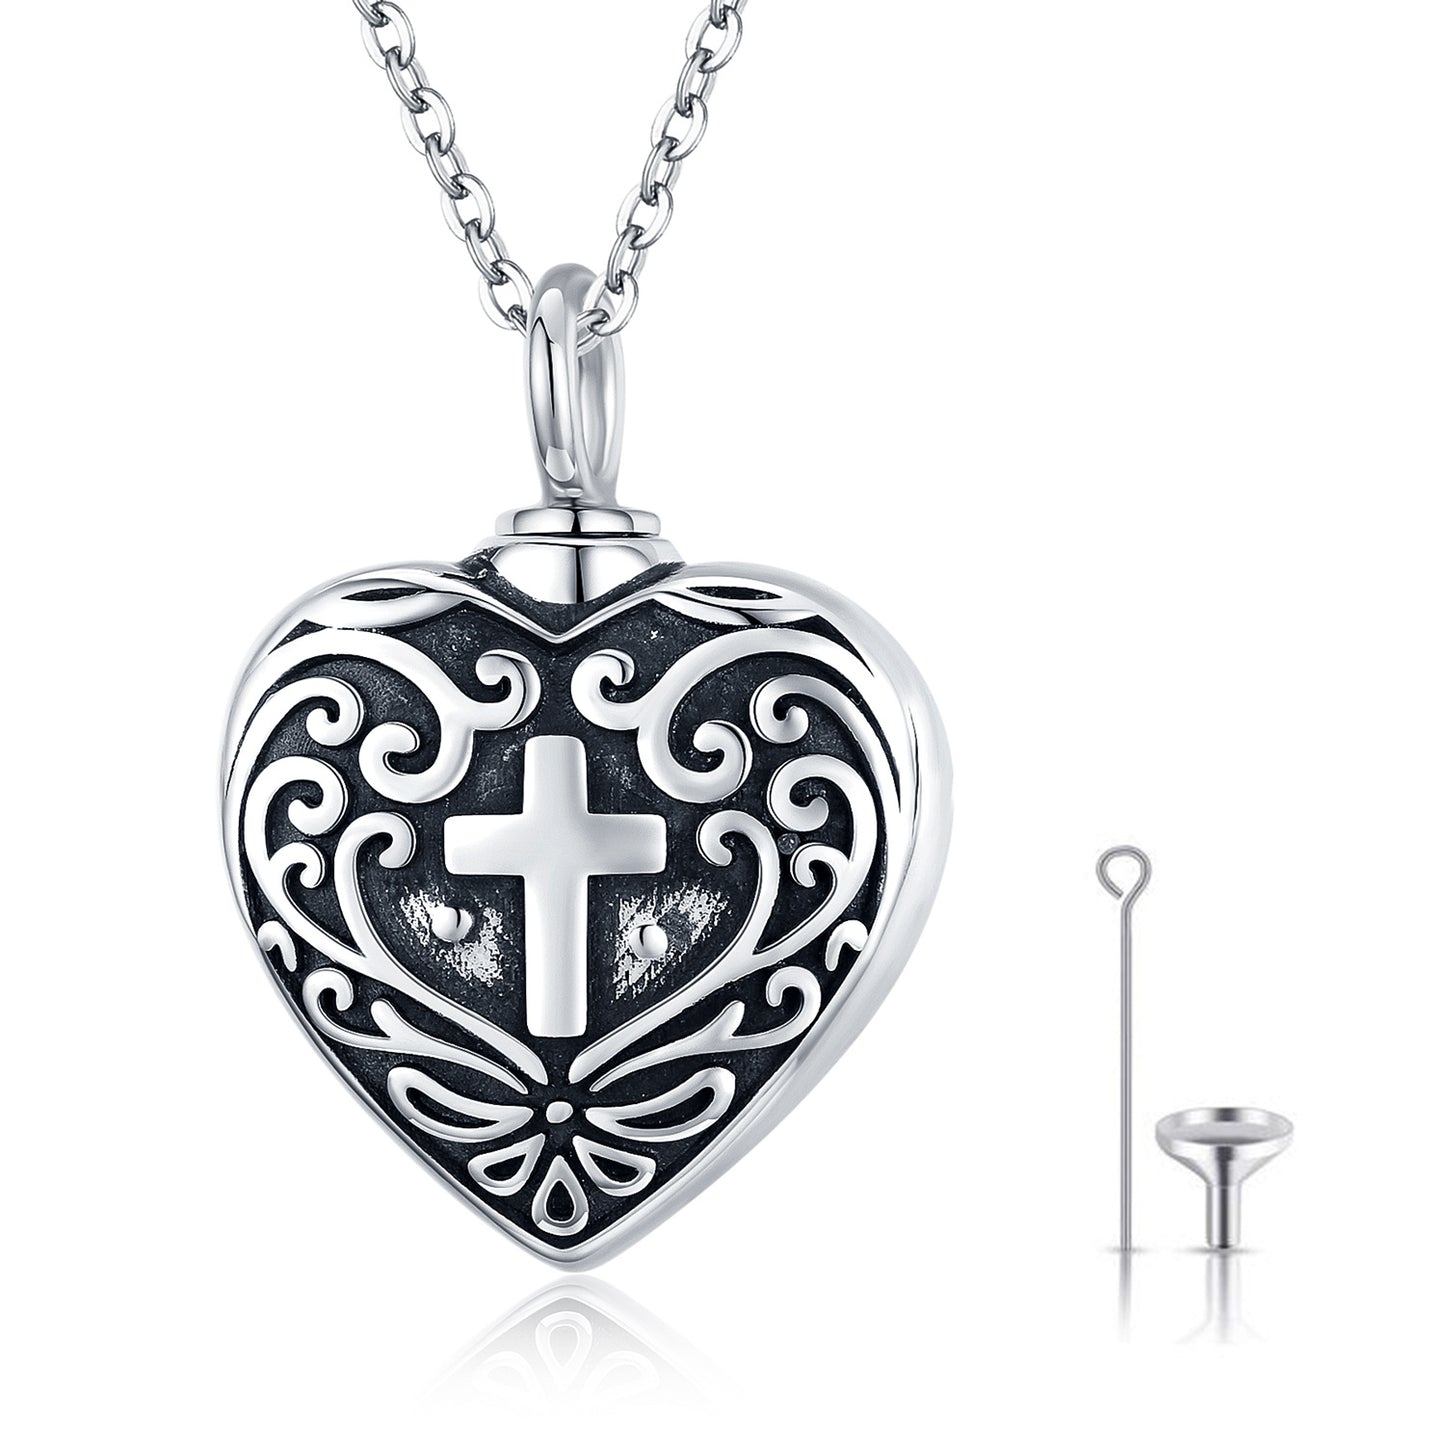 YFN S925 Cross Urn for Ashes Heart Cremation Keepsake Memorial Jewelry (Gift Box included)